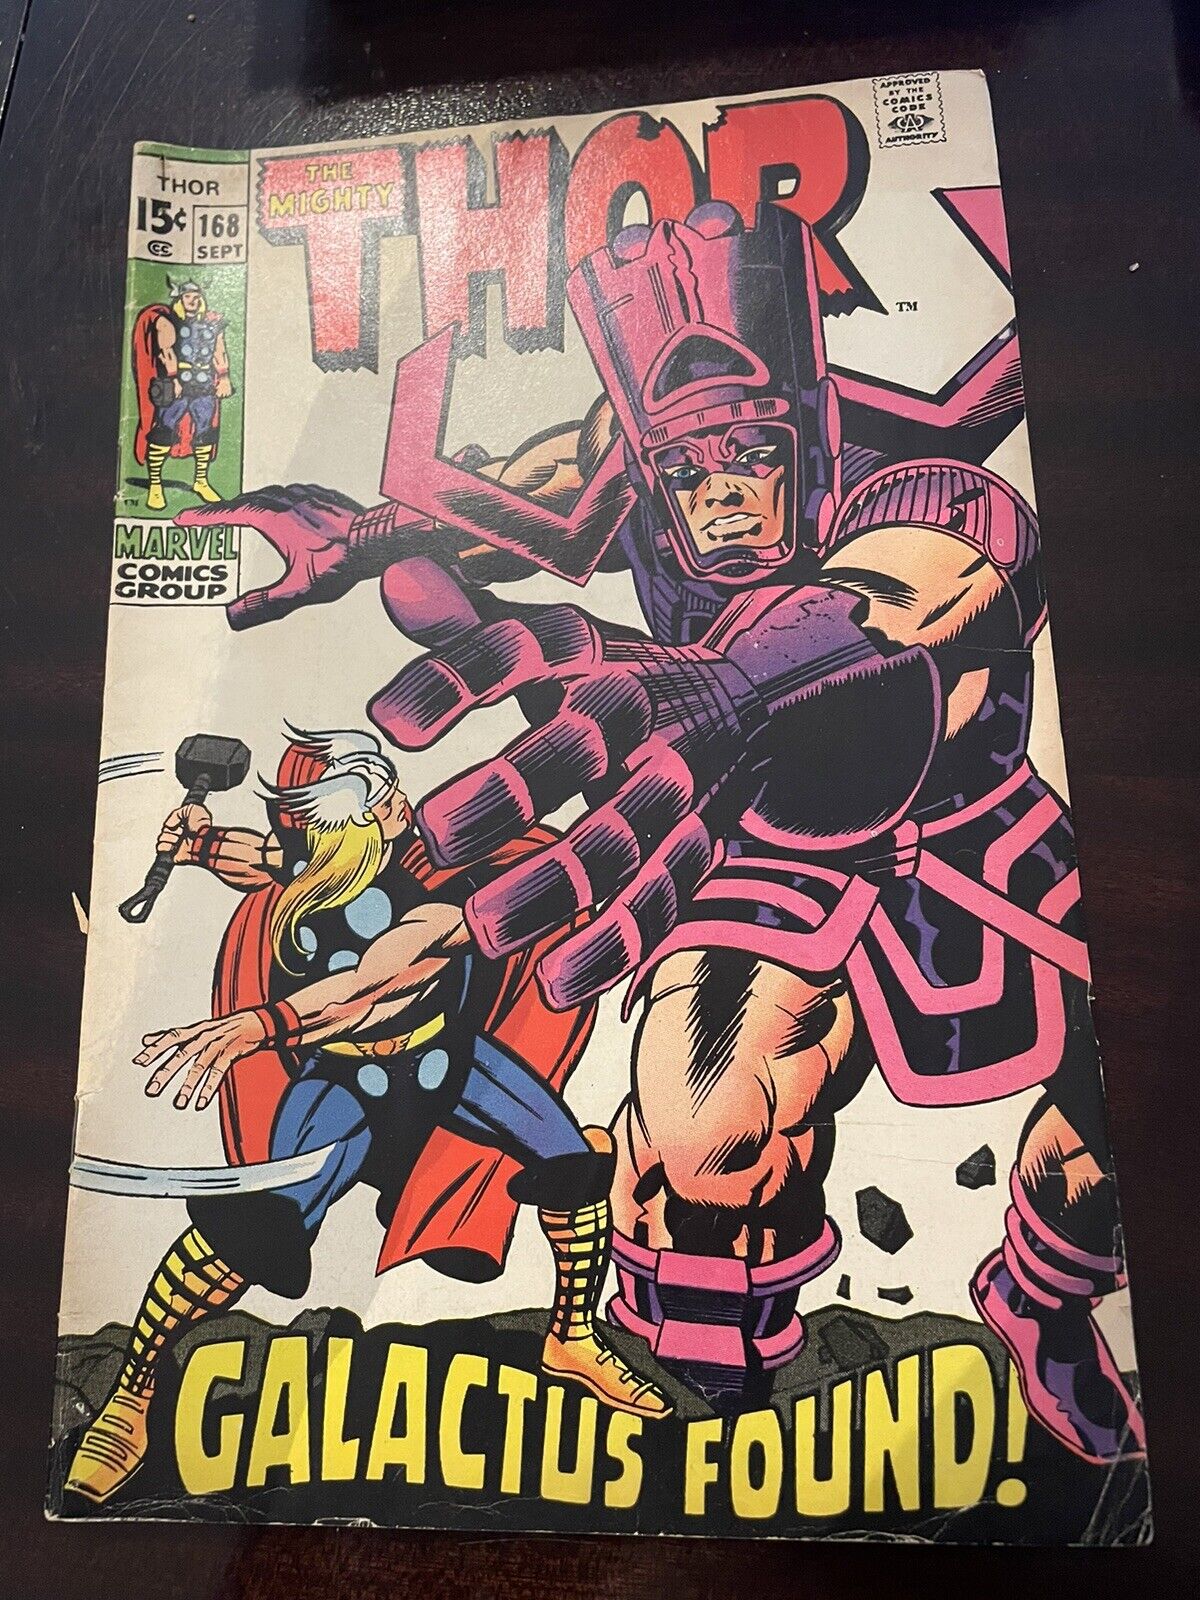 The Mighty Thor #168 SILVER AGE Marvel Comics 1969 Origin of Galactus Lee/Kirby